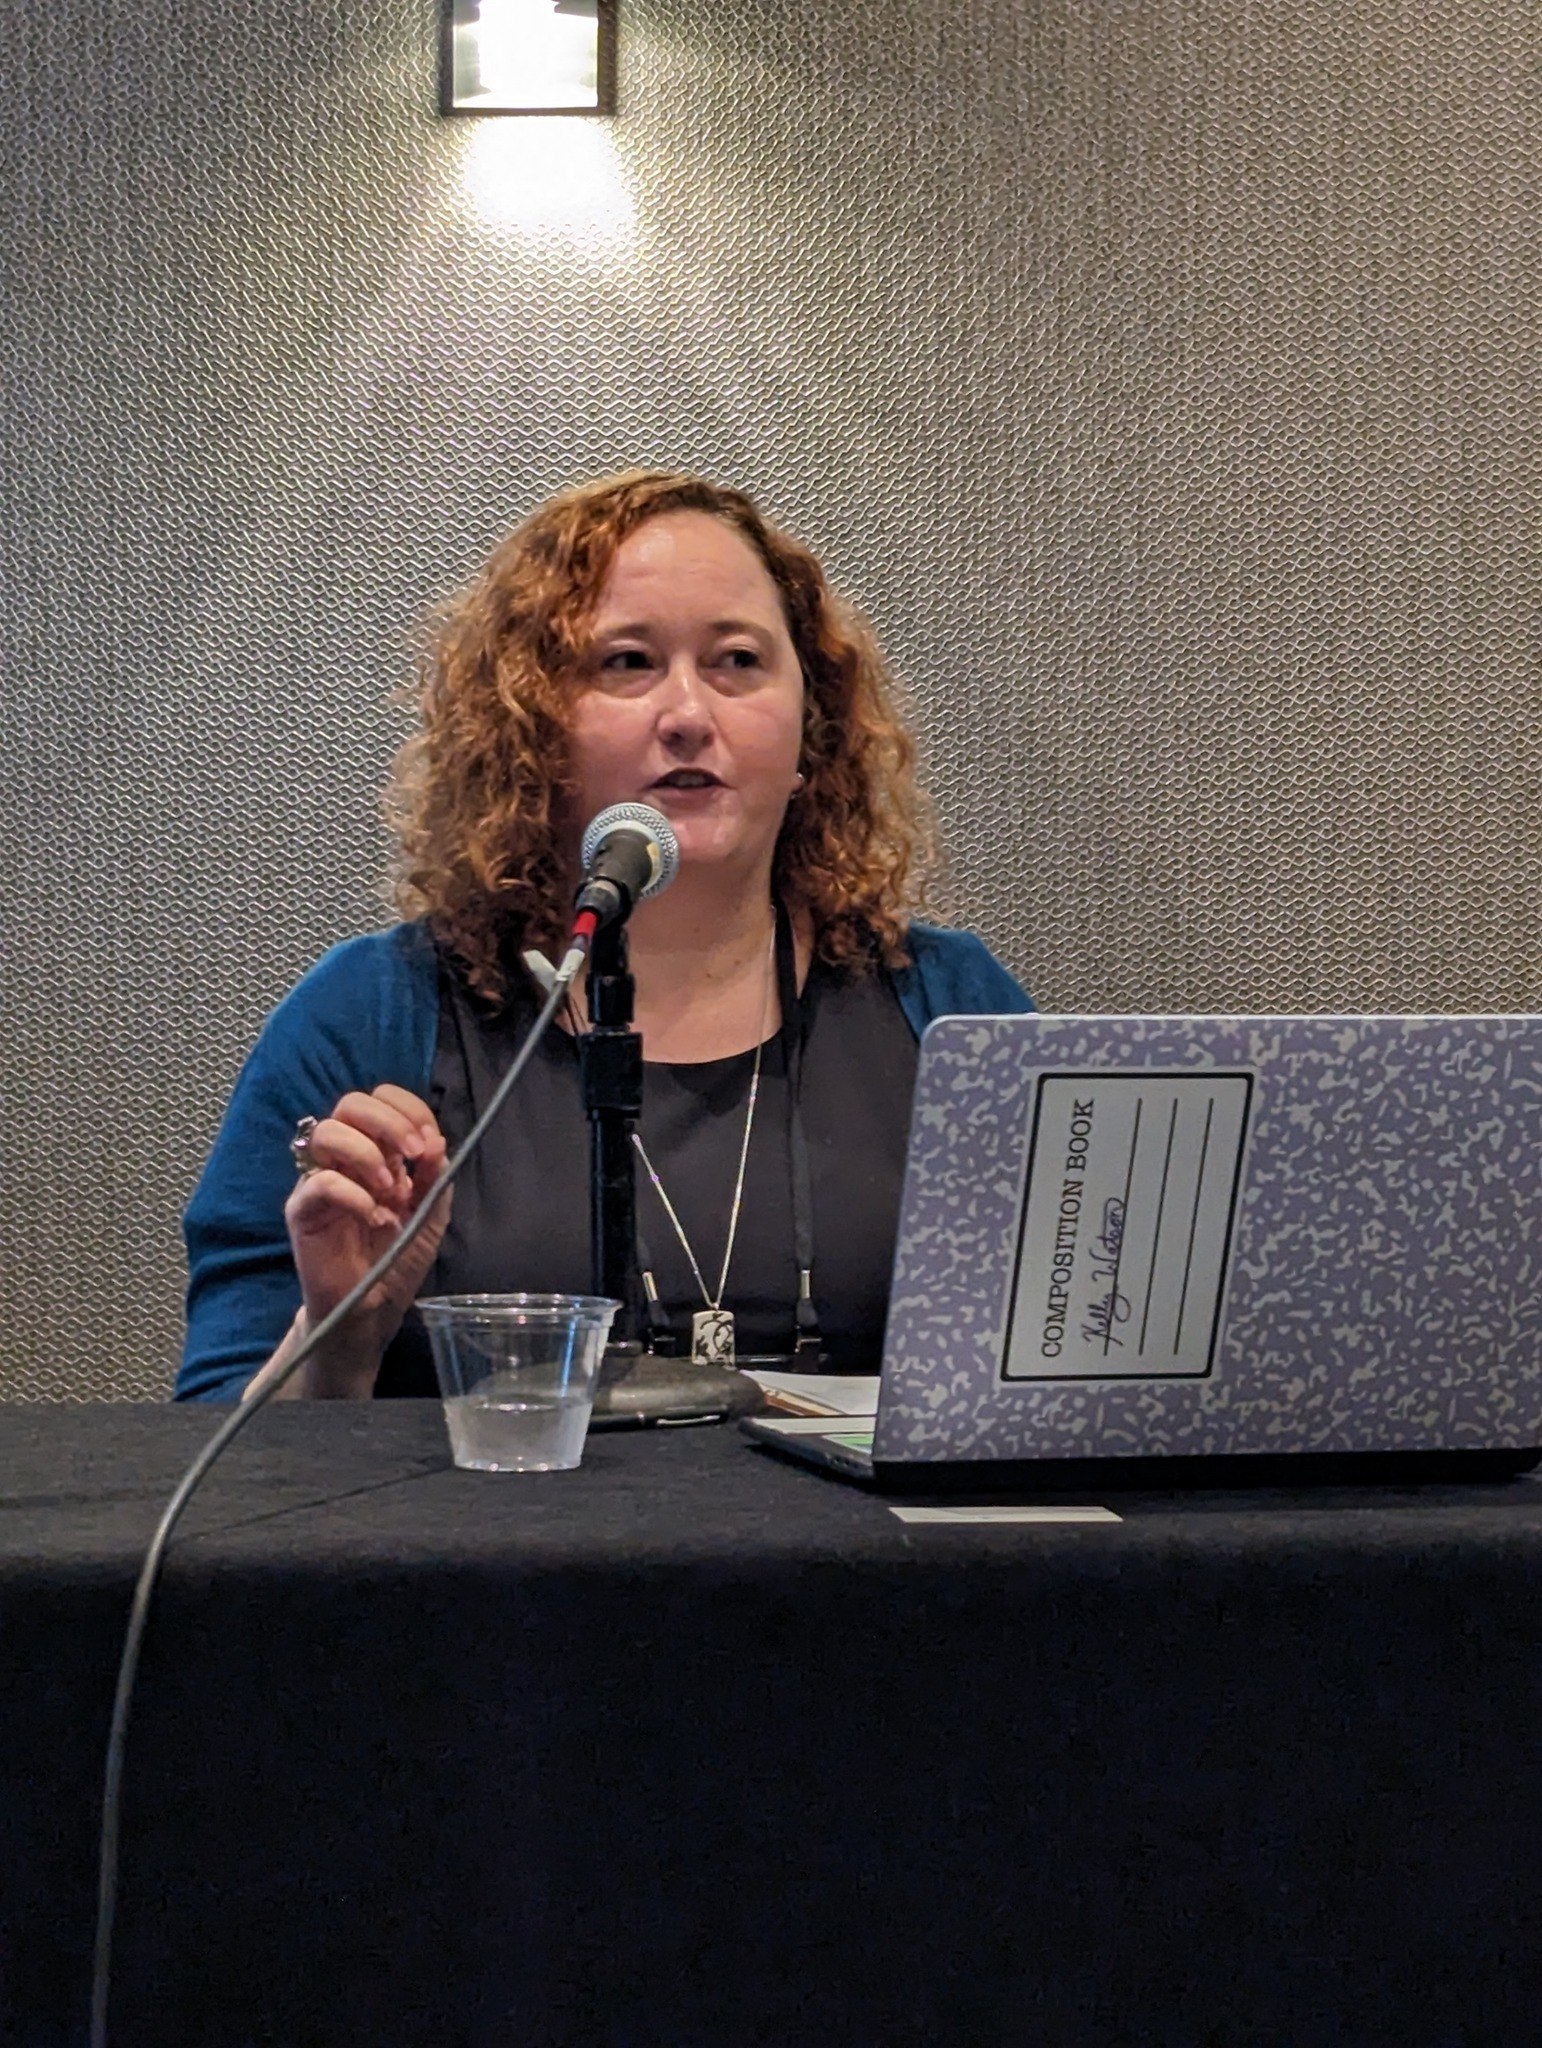  White woman with curly red hair is seated at a table, delivering presentation to audience